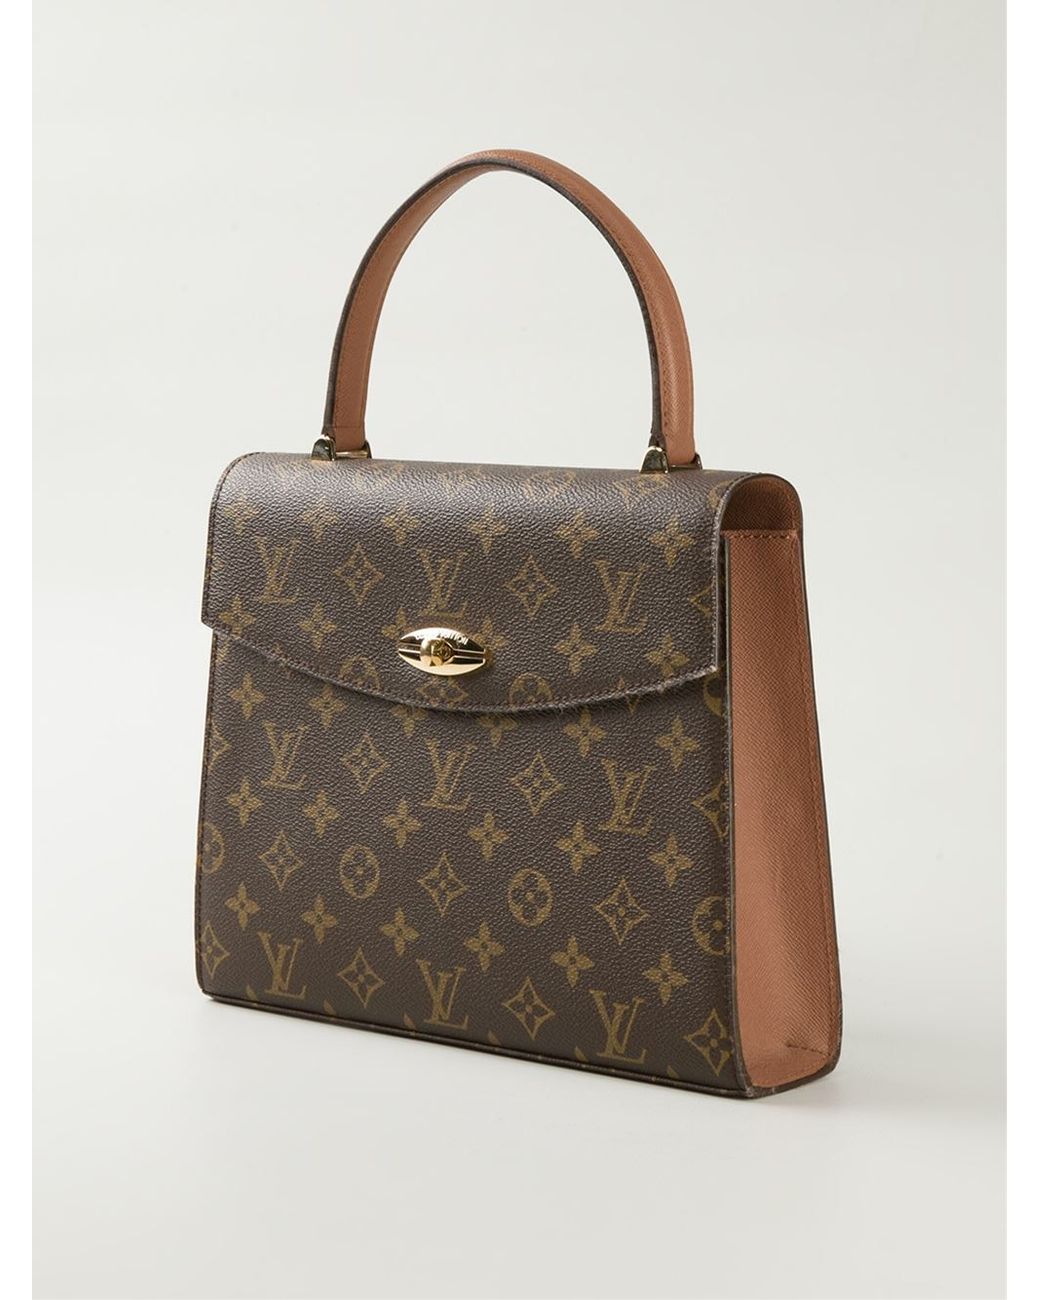 Louis Vuitton Men Tote Bag - 2 For Sale on 1stDibs